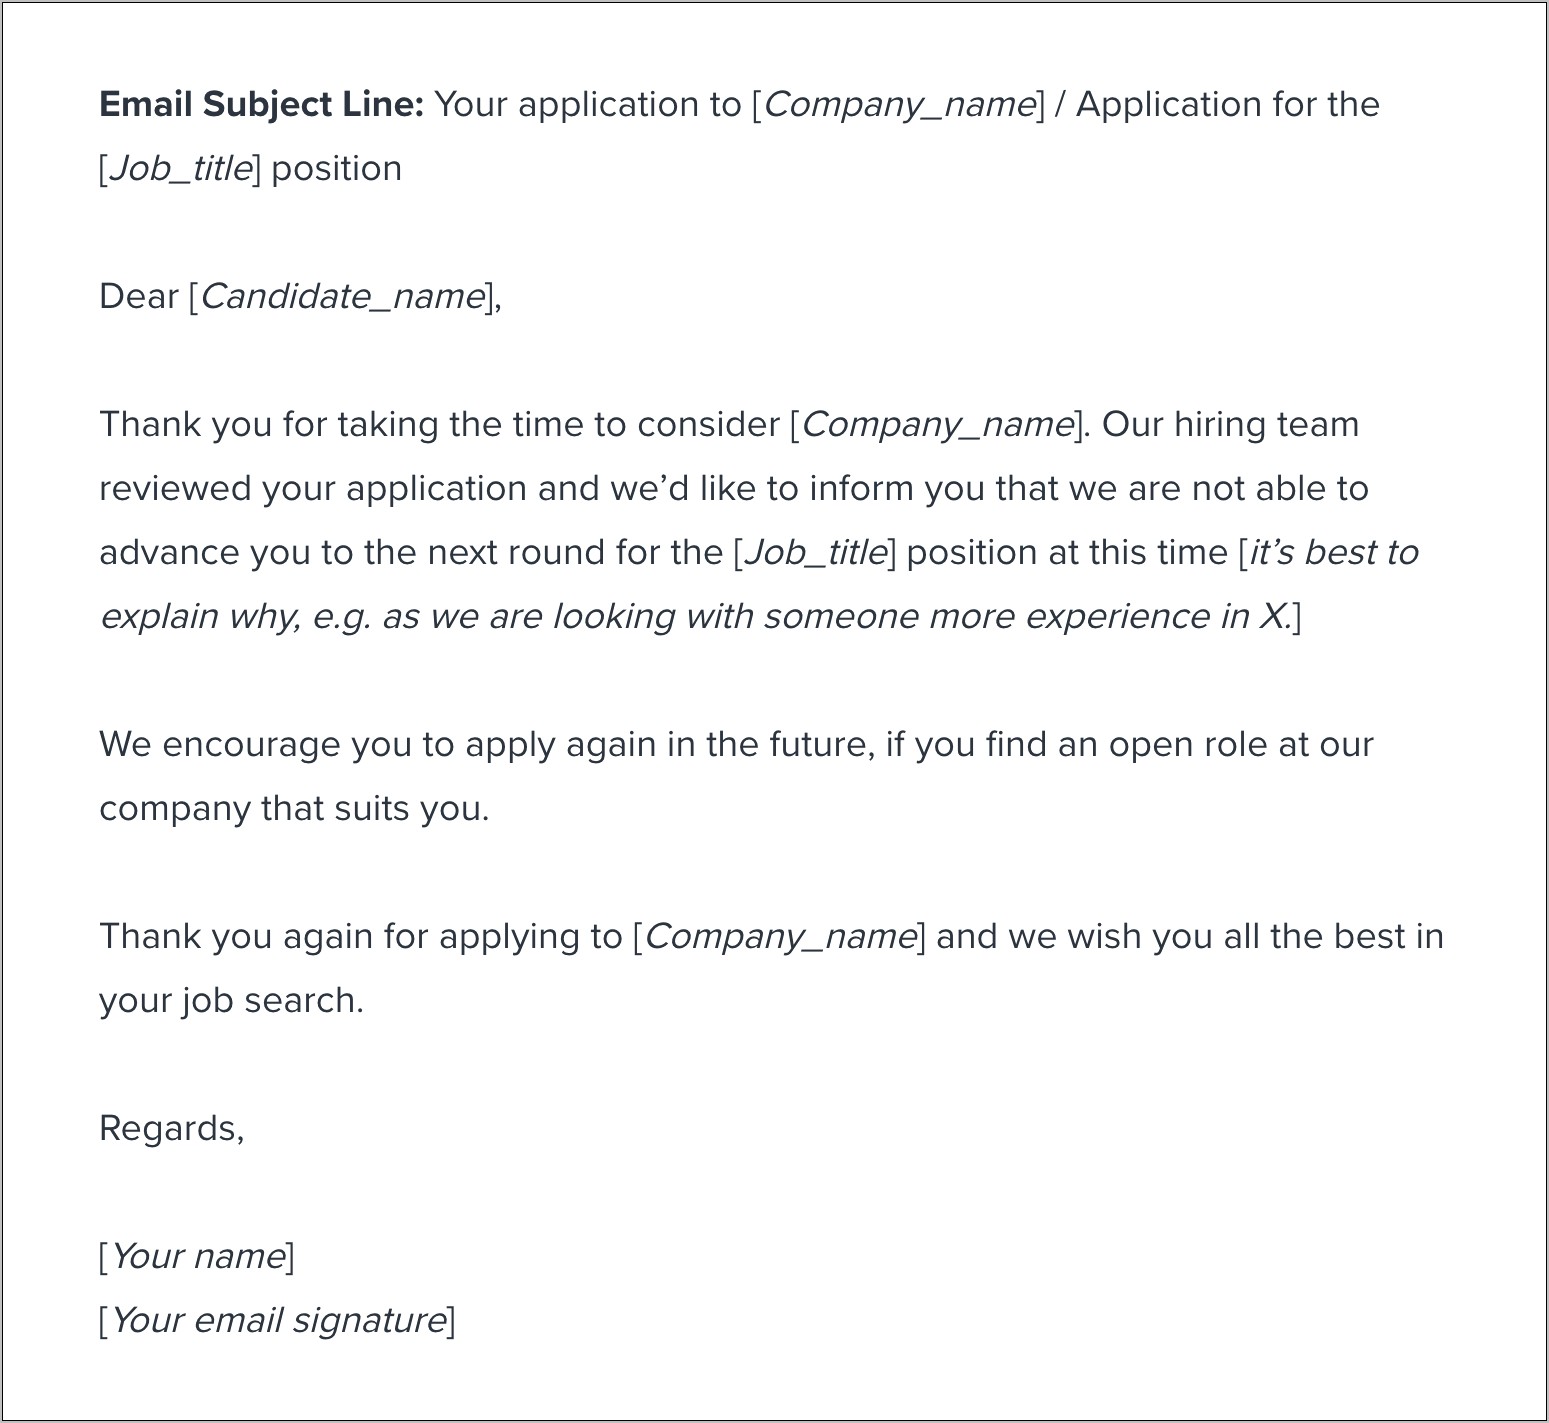 Sample Email To Applicants Resume Search